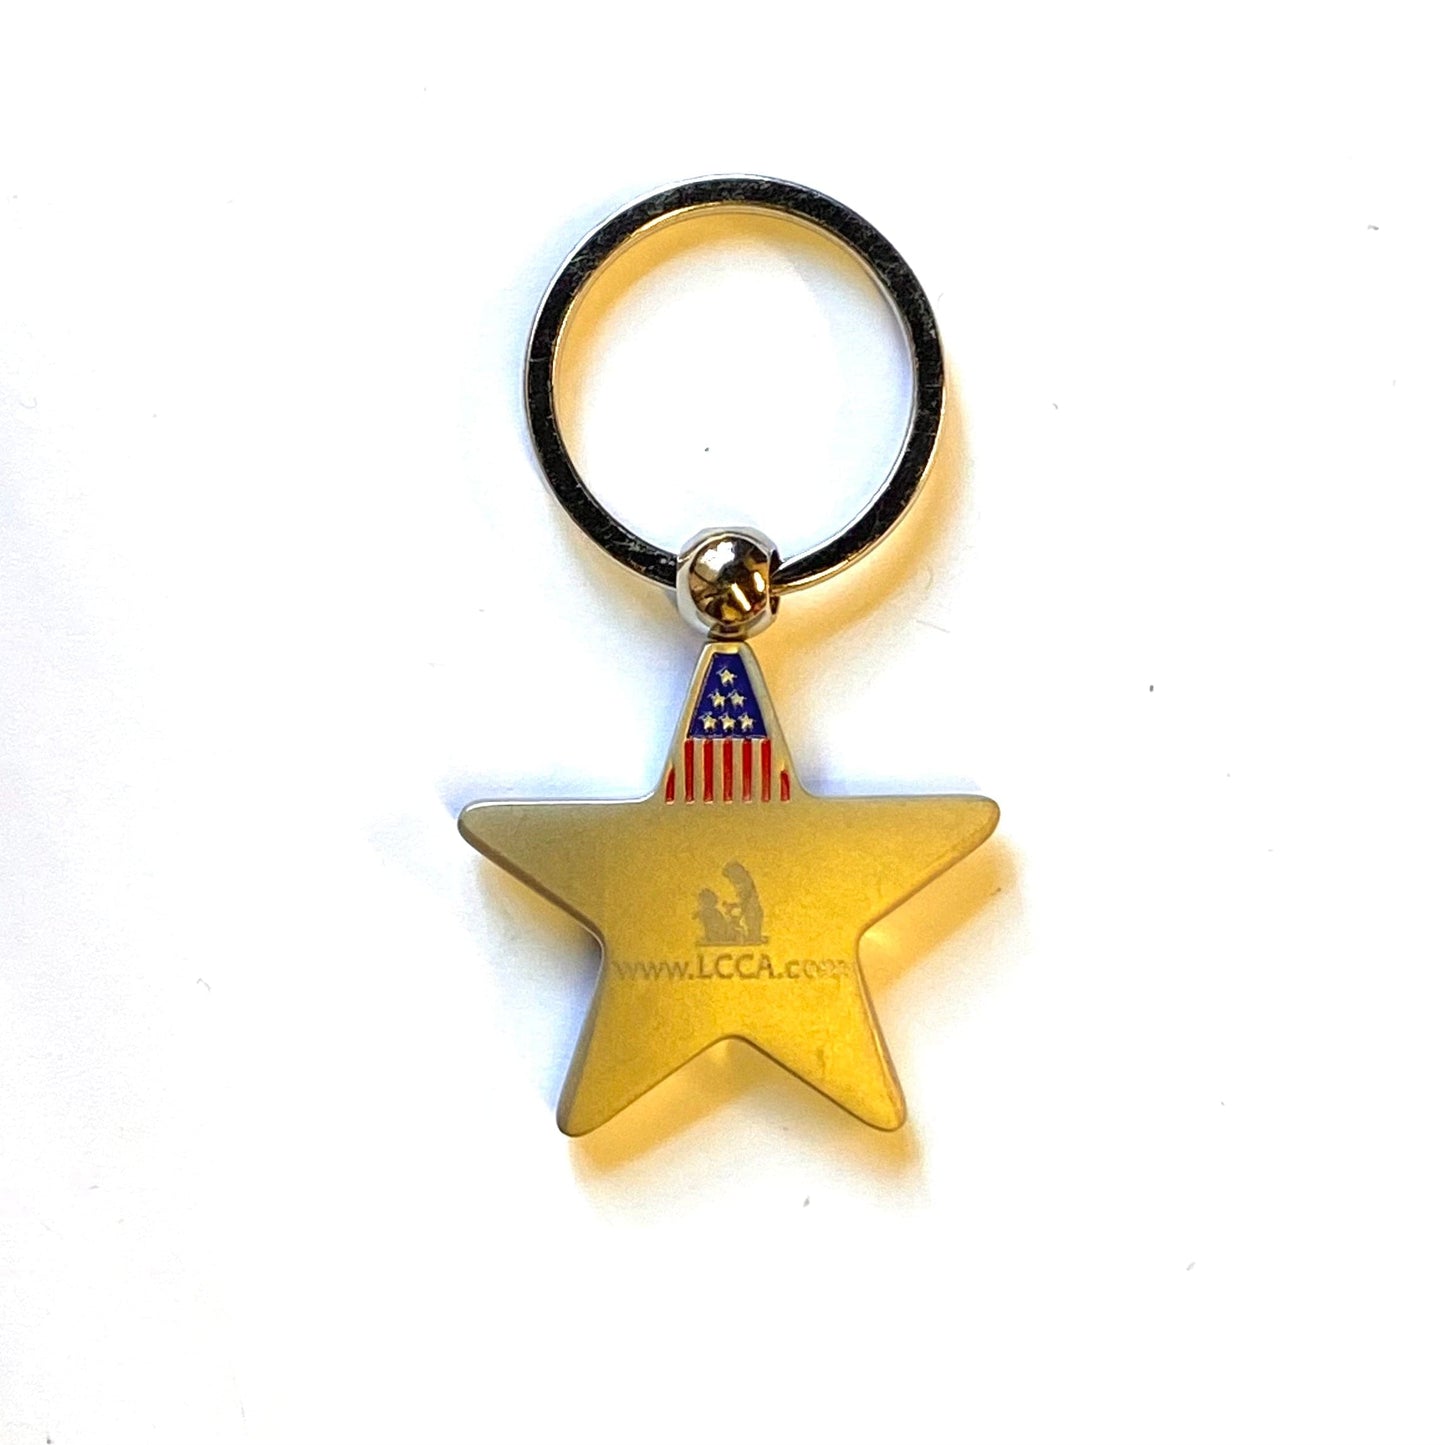 LIFE CARE CENTERS OF AMERICA Silvertone Star Keychain Key Ring Charm